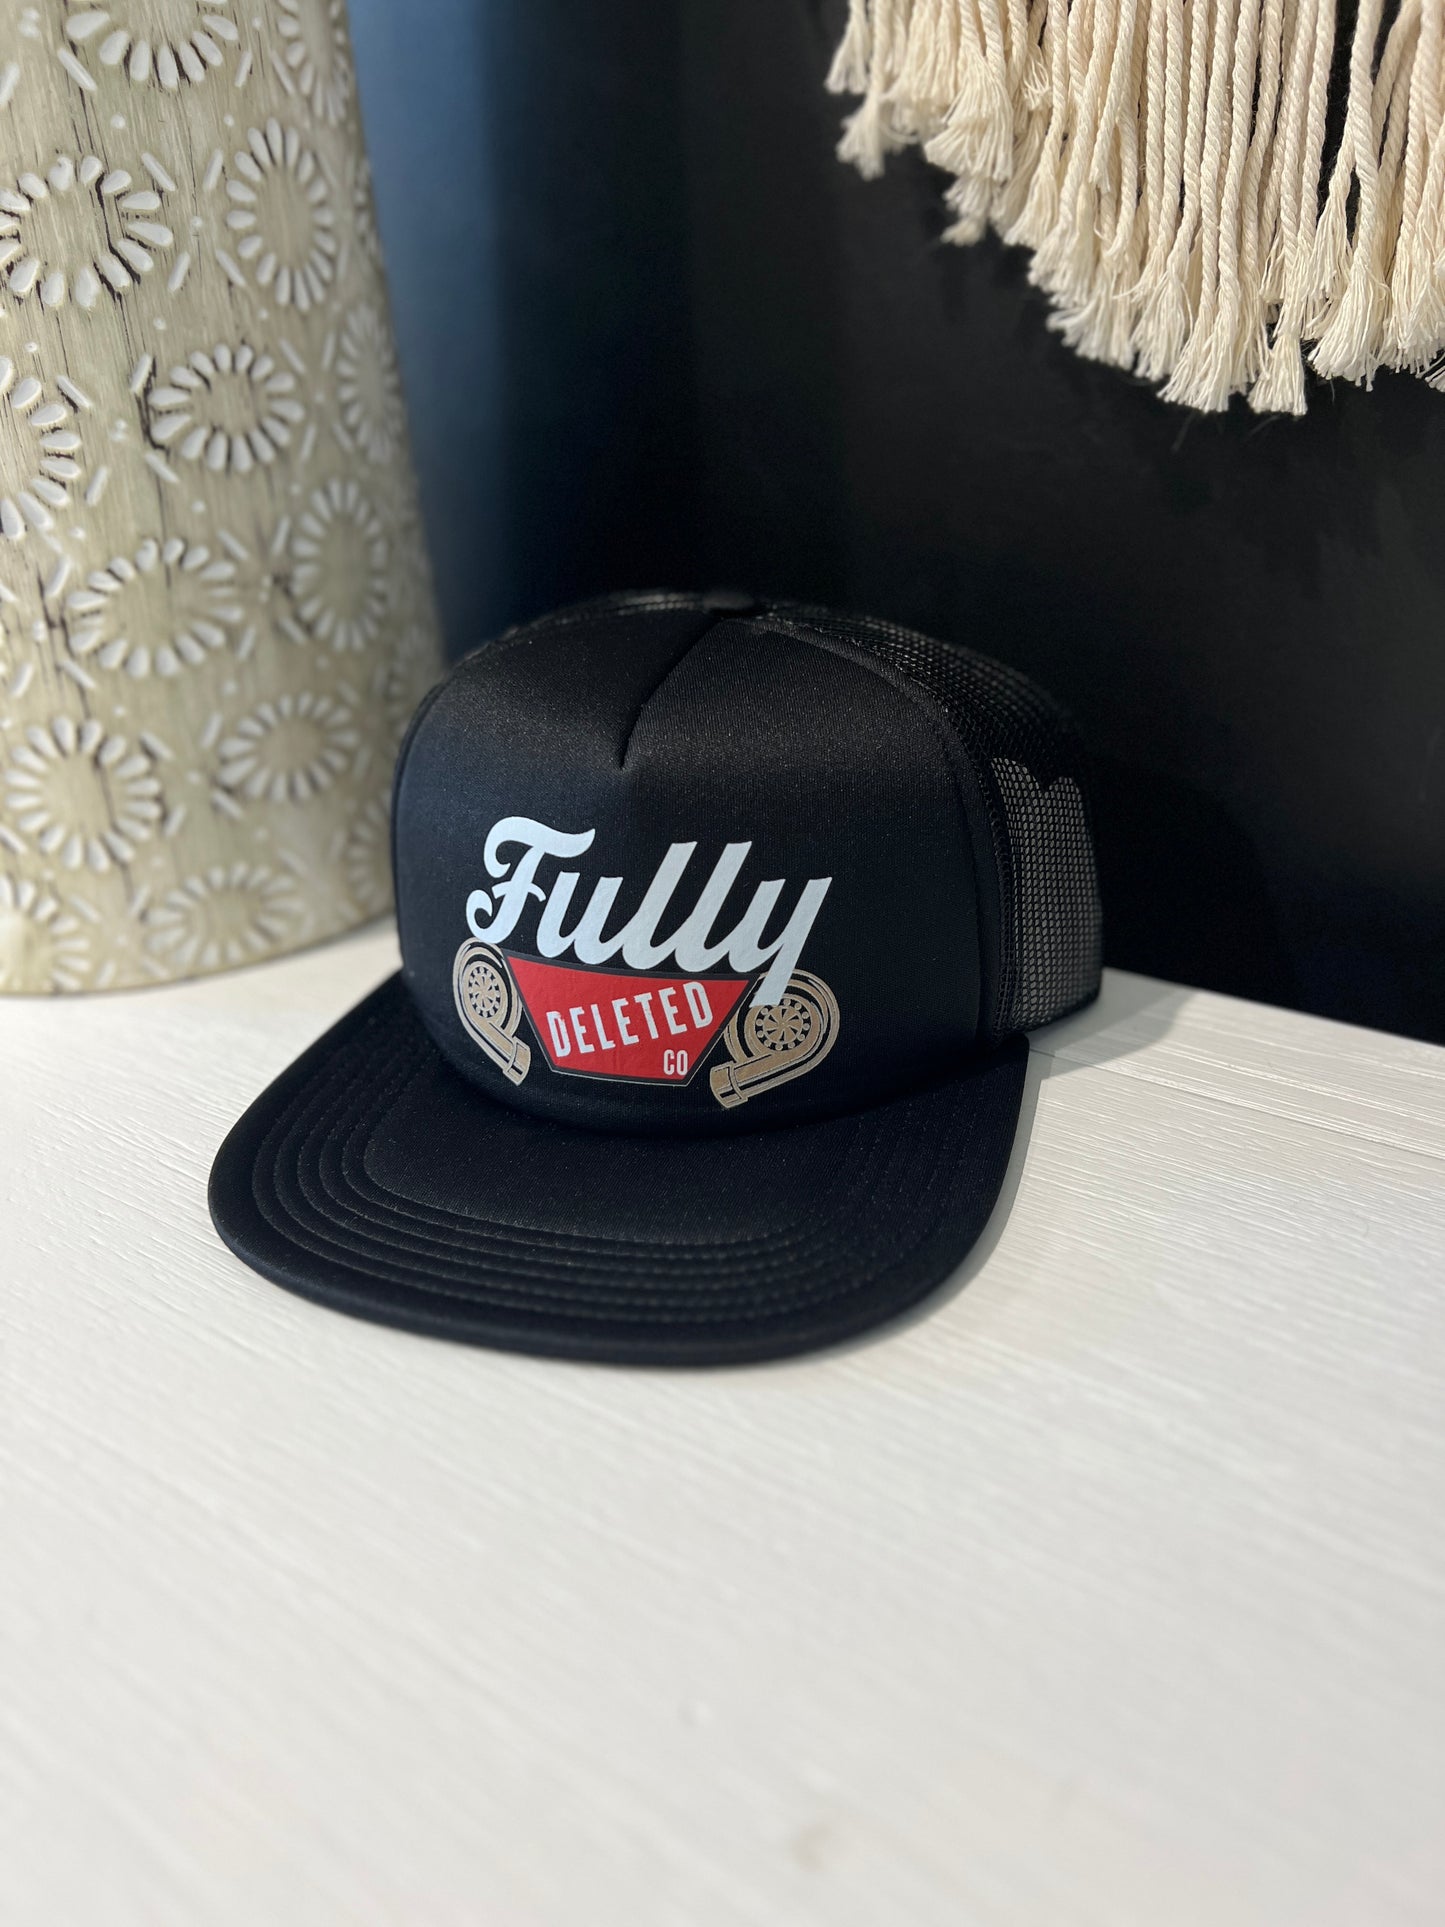 Fully Deleted Hat